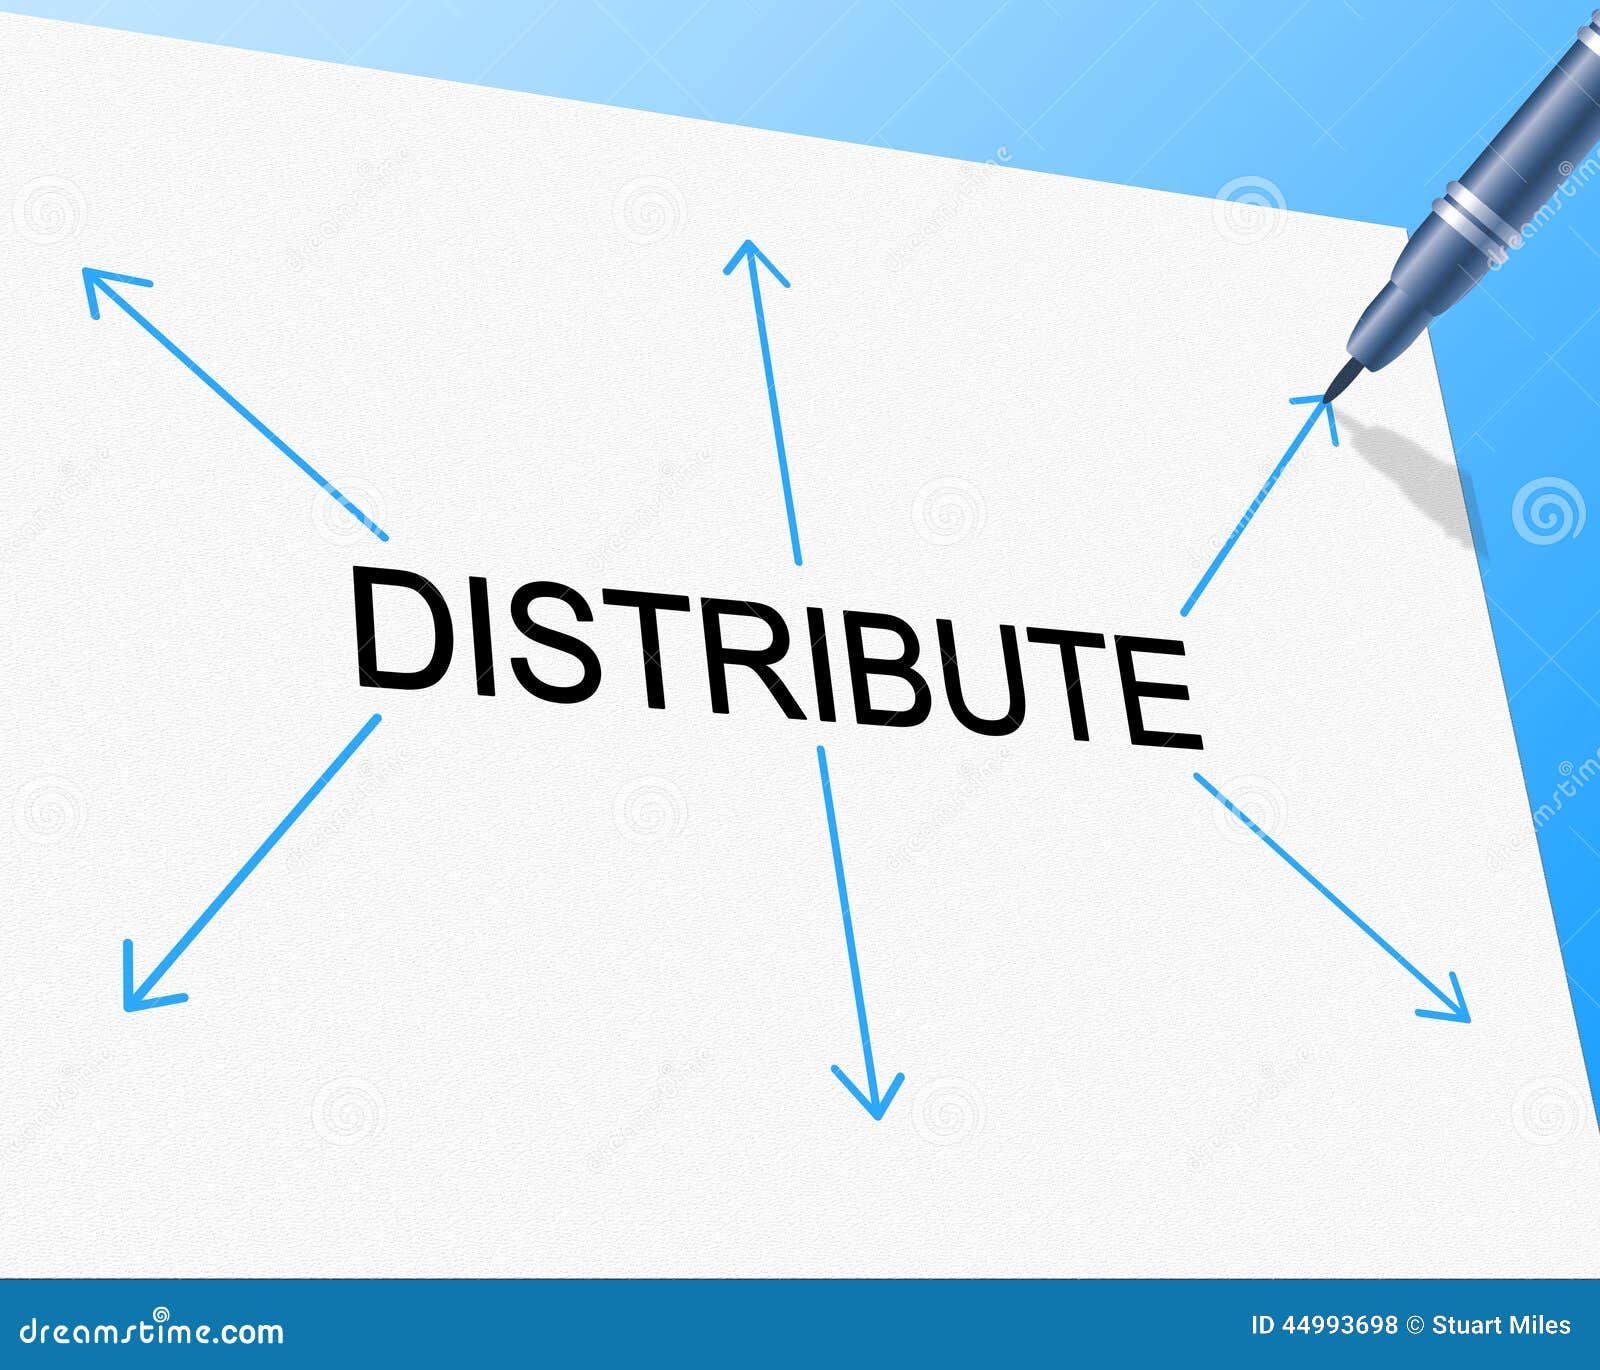 Distribute Distribution Indicates Supply Chain And ...
